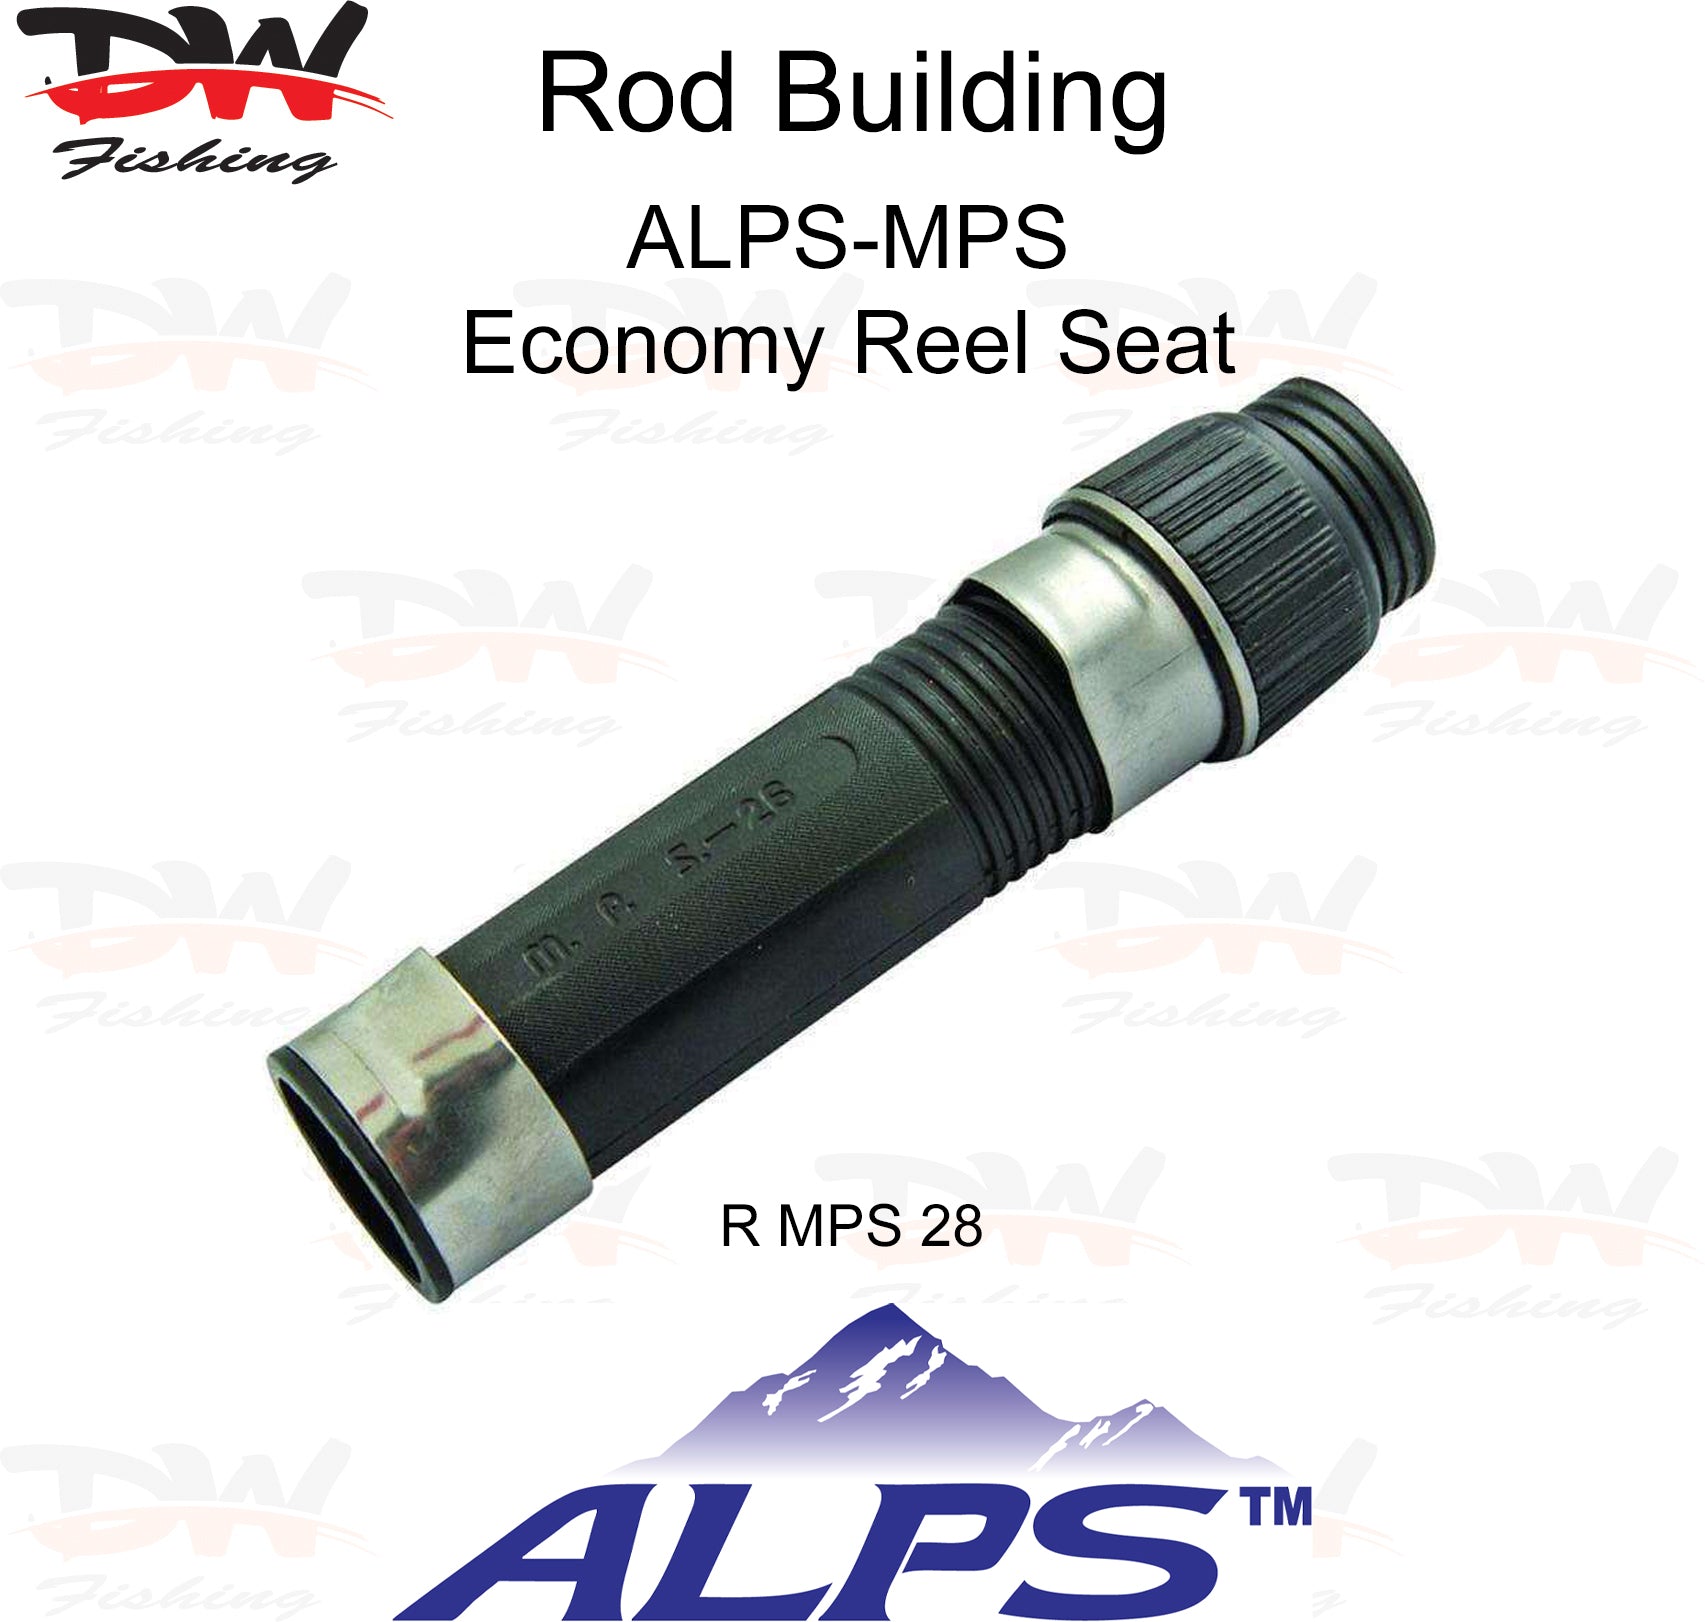 ALPS MPS economy reel seat size 28 with ALPS logo below